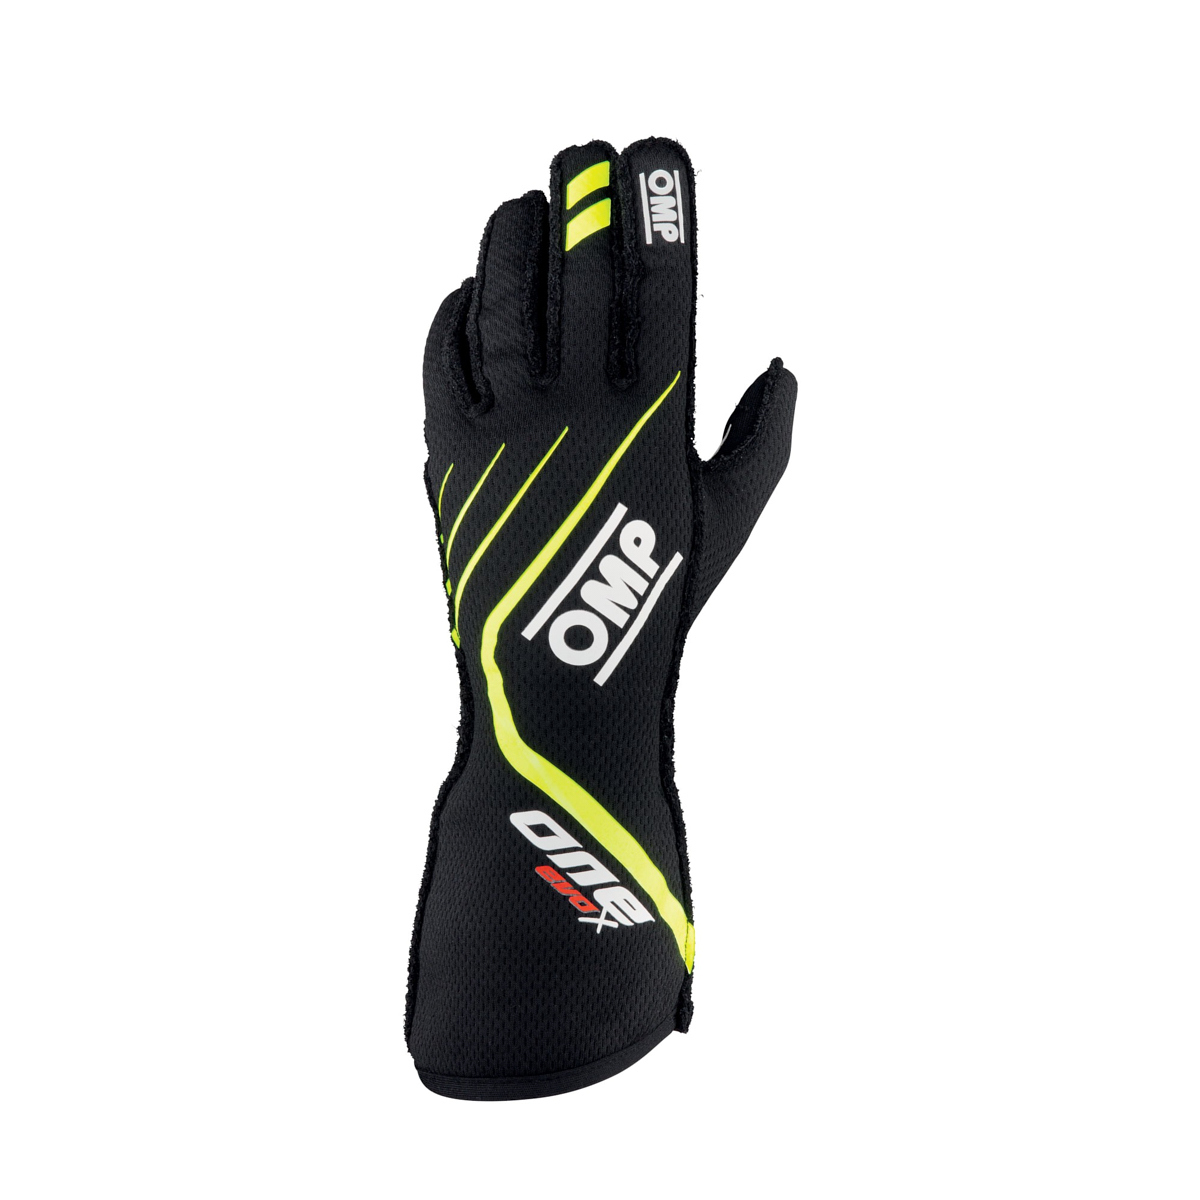 OMP Racing IB771NGIXS Driving Gloves, One EVO X, FIA Approved, Double Layer, Fire Retardant Fabric, Black / Fluorescent Yellow, X-Small, Pair